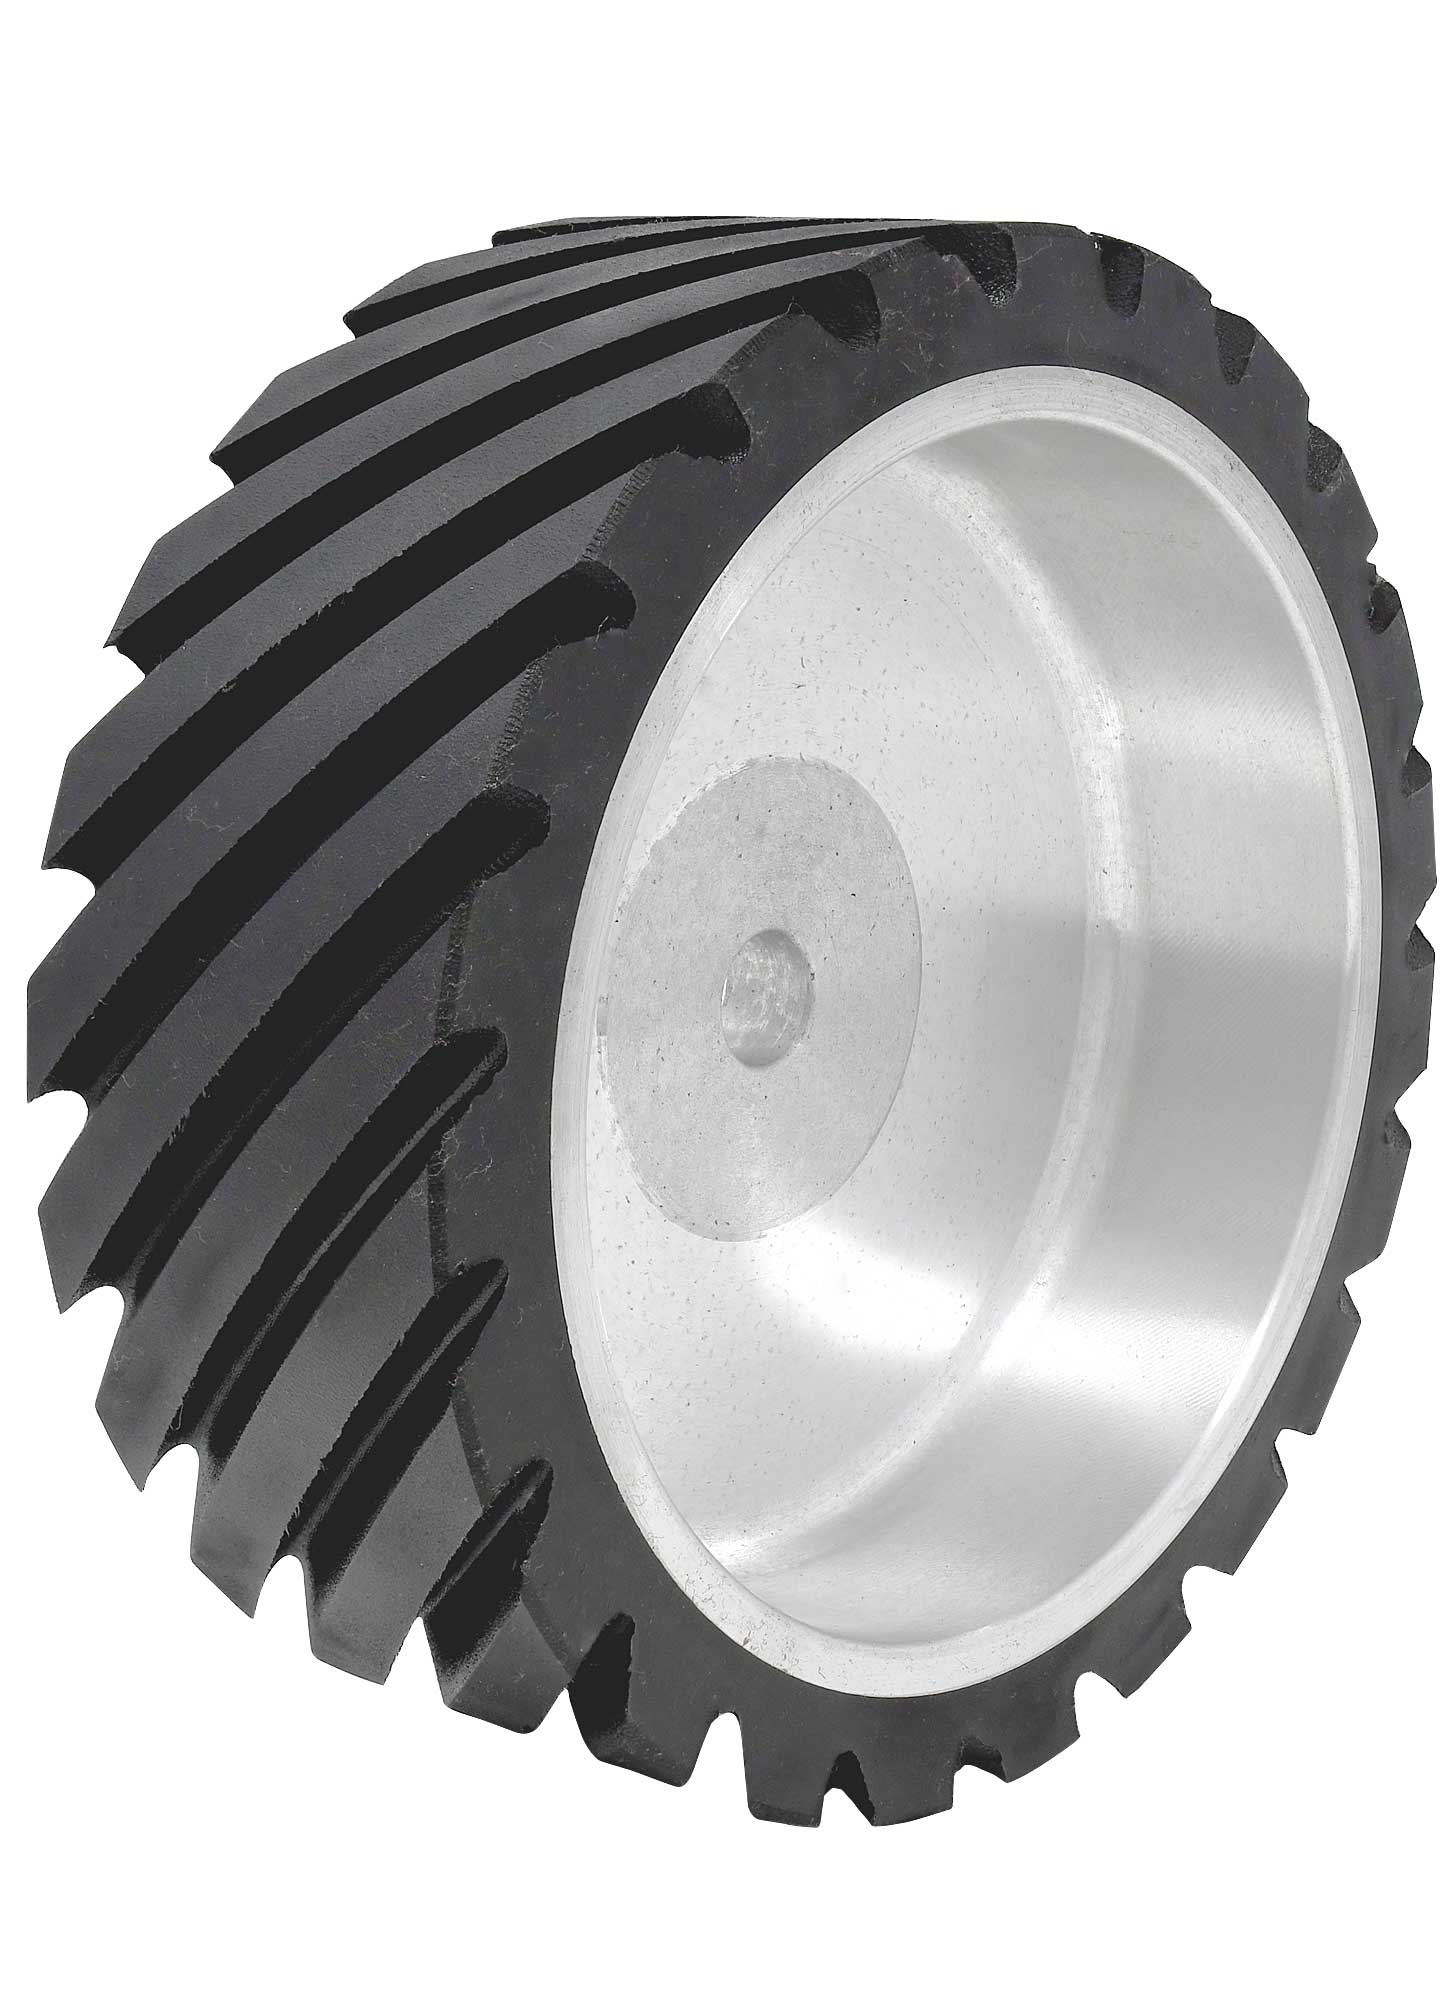 802-S-90 Serrated Contact Wheel, 7 x 2.5, 90 Duro